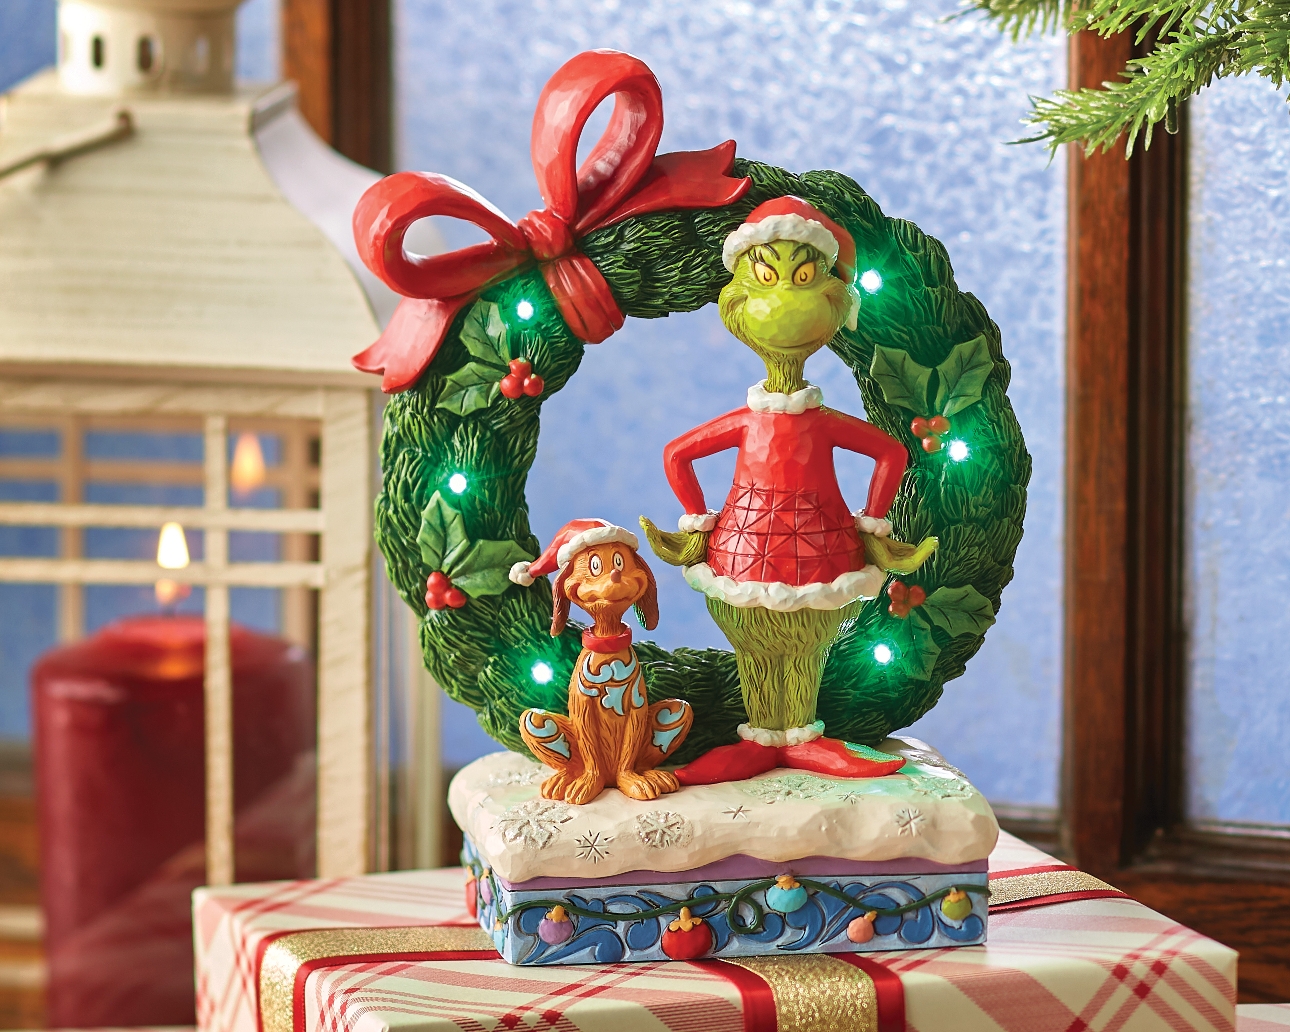 ornament of The Grinch, with Max, standing in front of a Christmas Wreath 